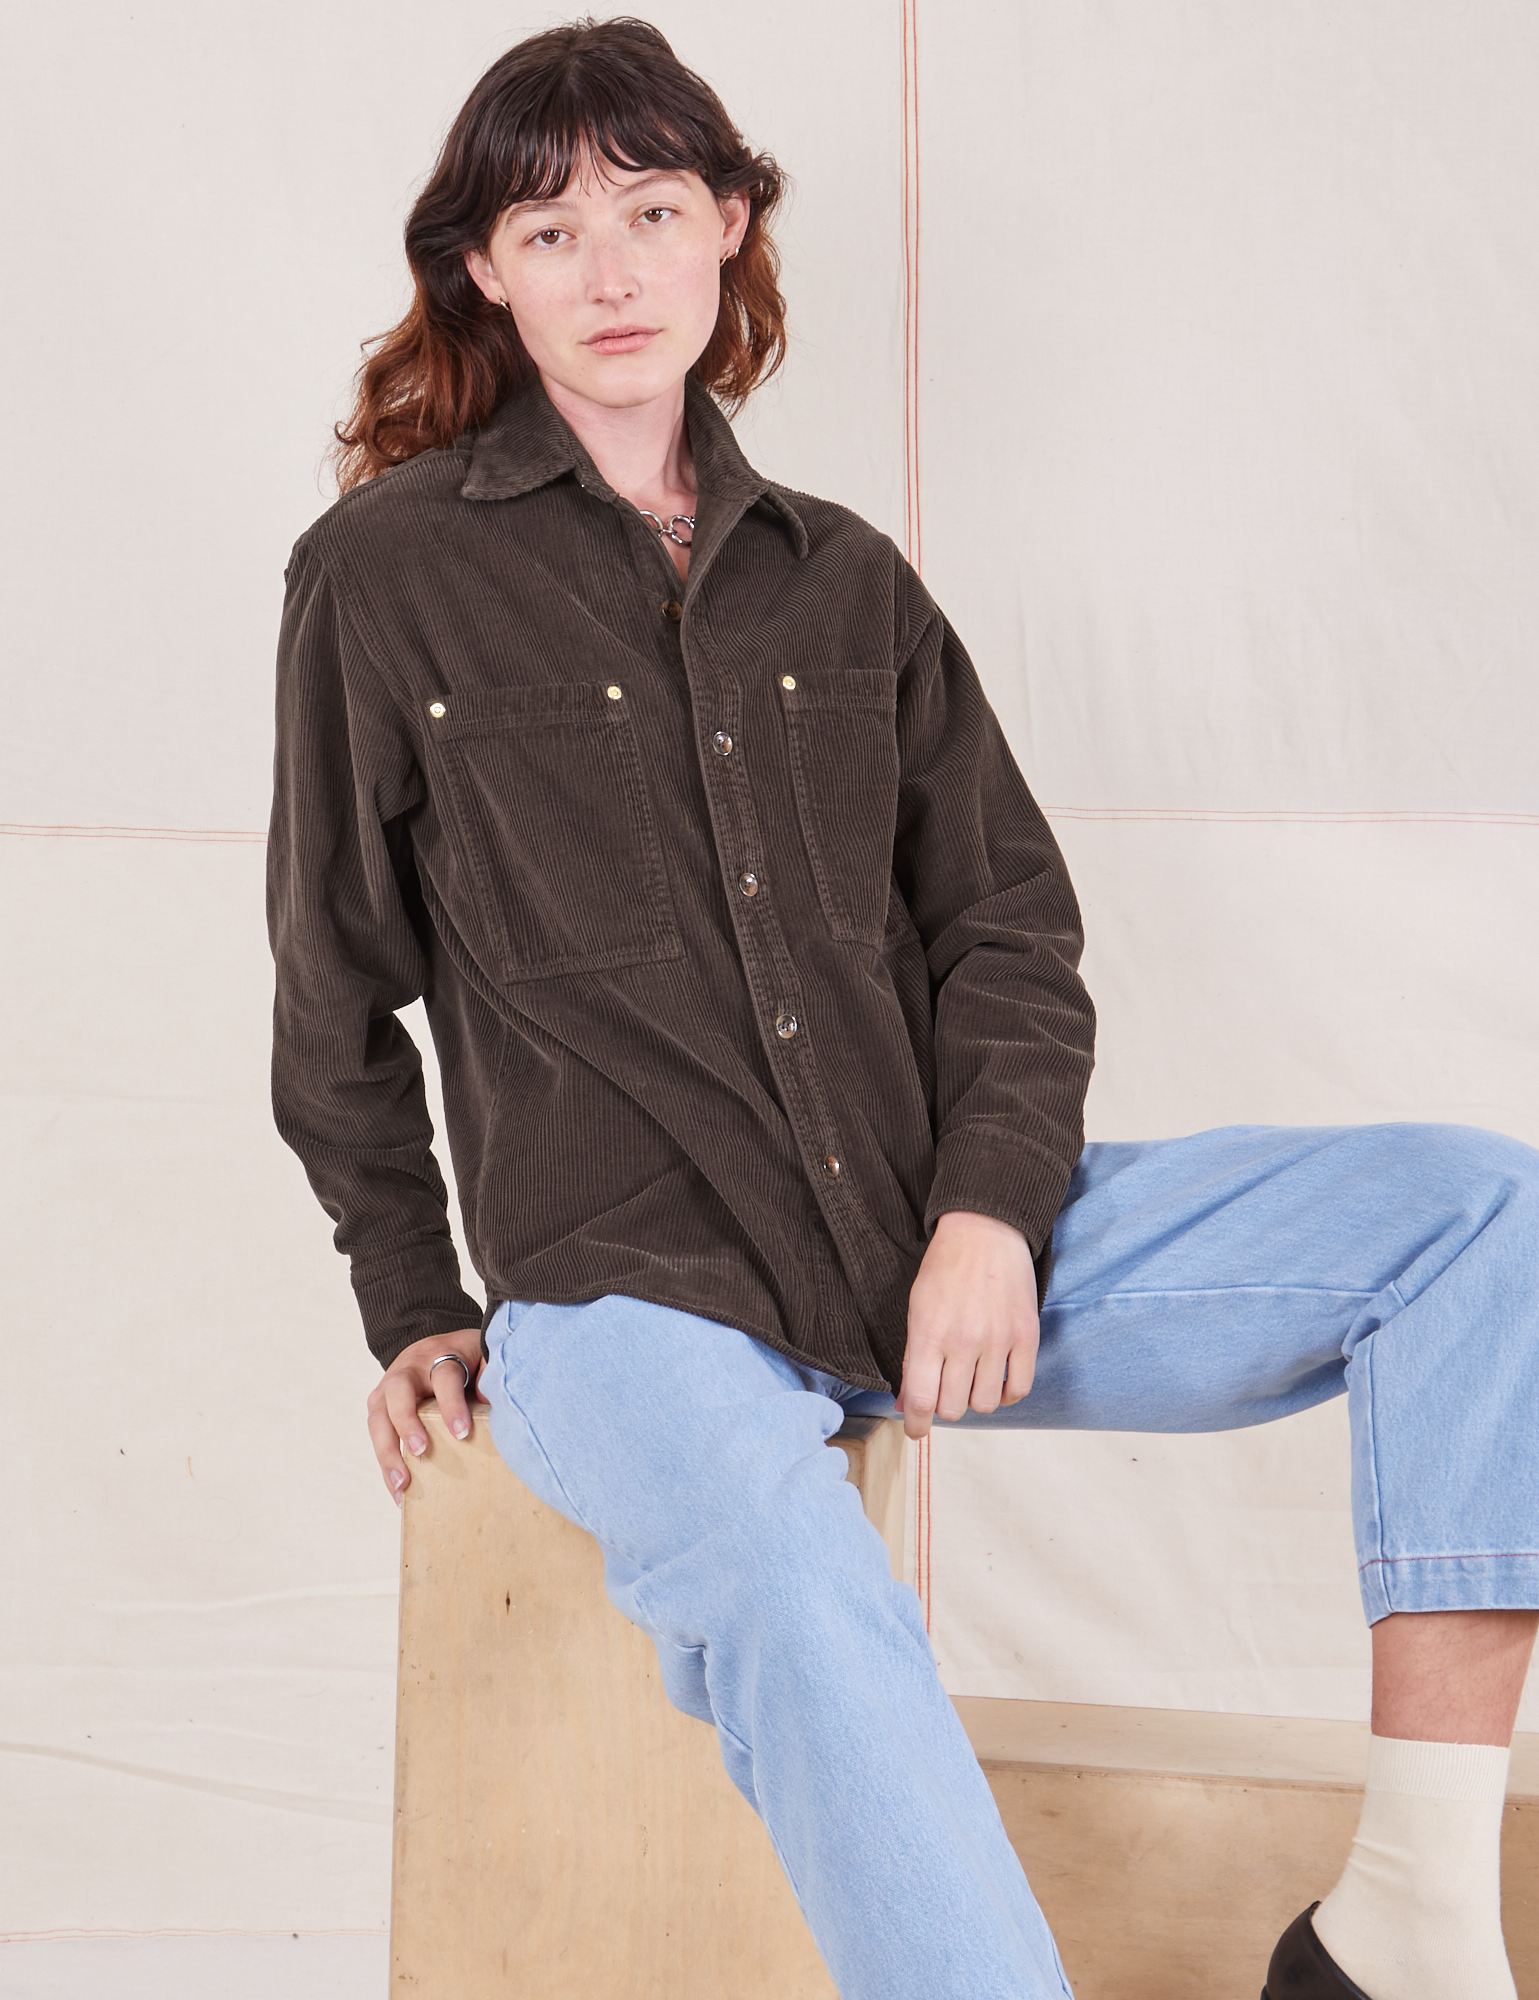 Alex is wearing a buttoned up Corduroy Overshirt in Espresso Brown and light wash Denim Trouser Jeans